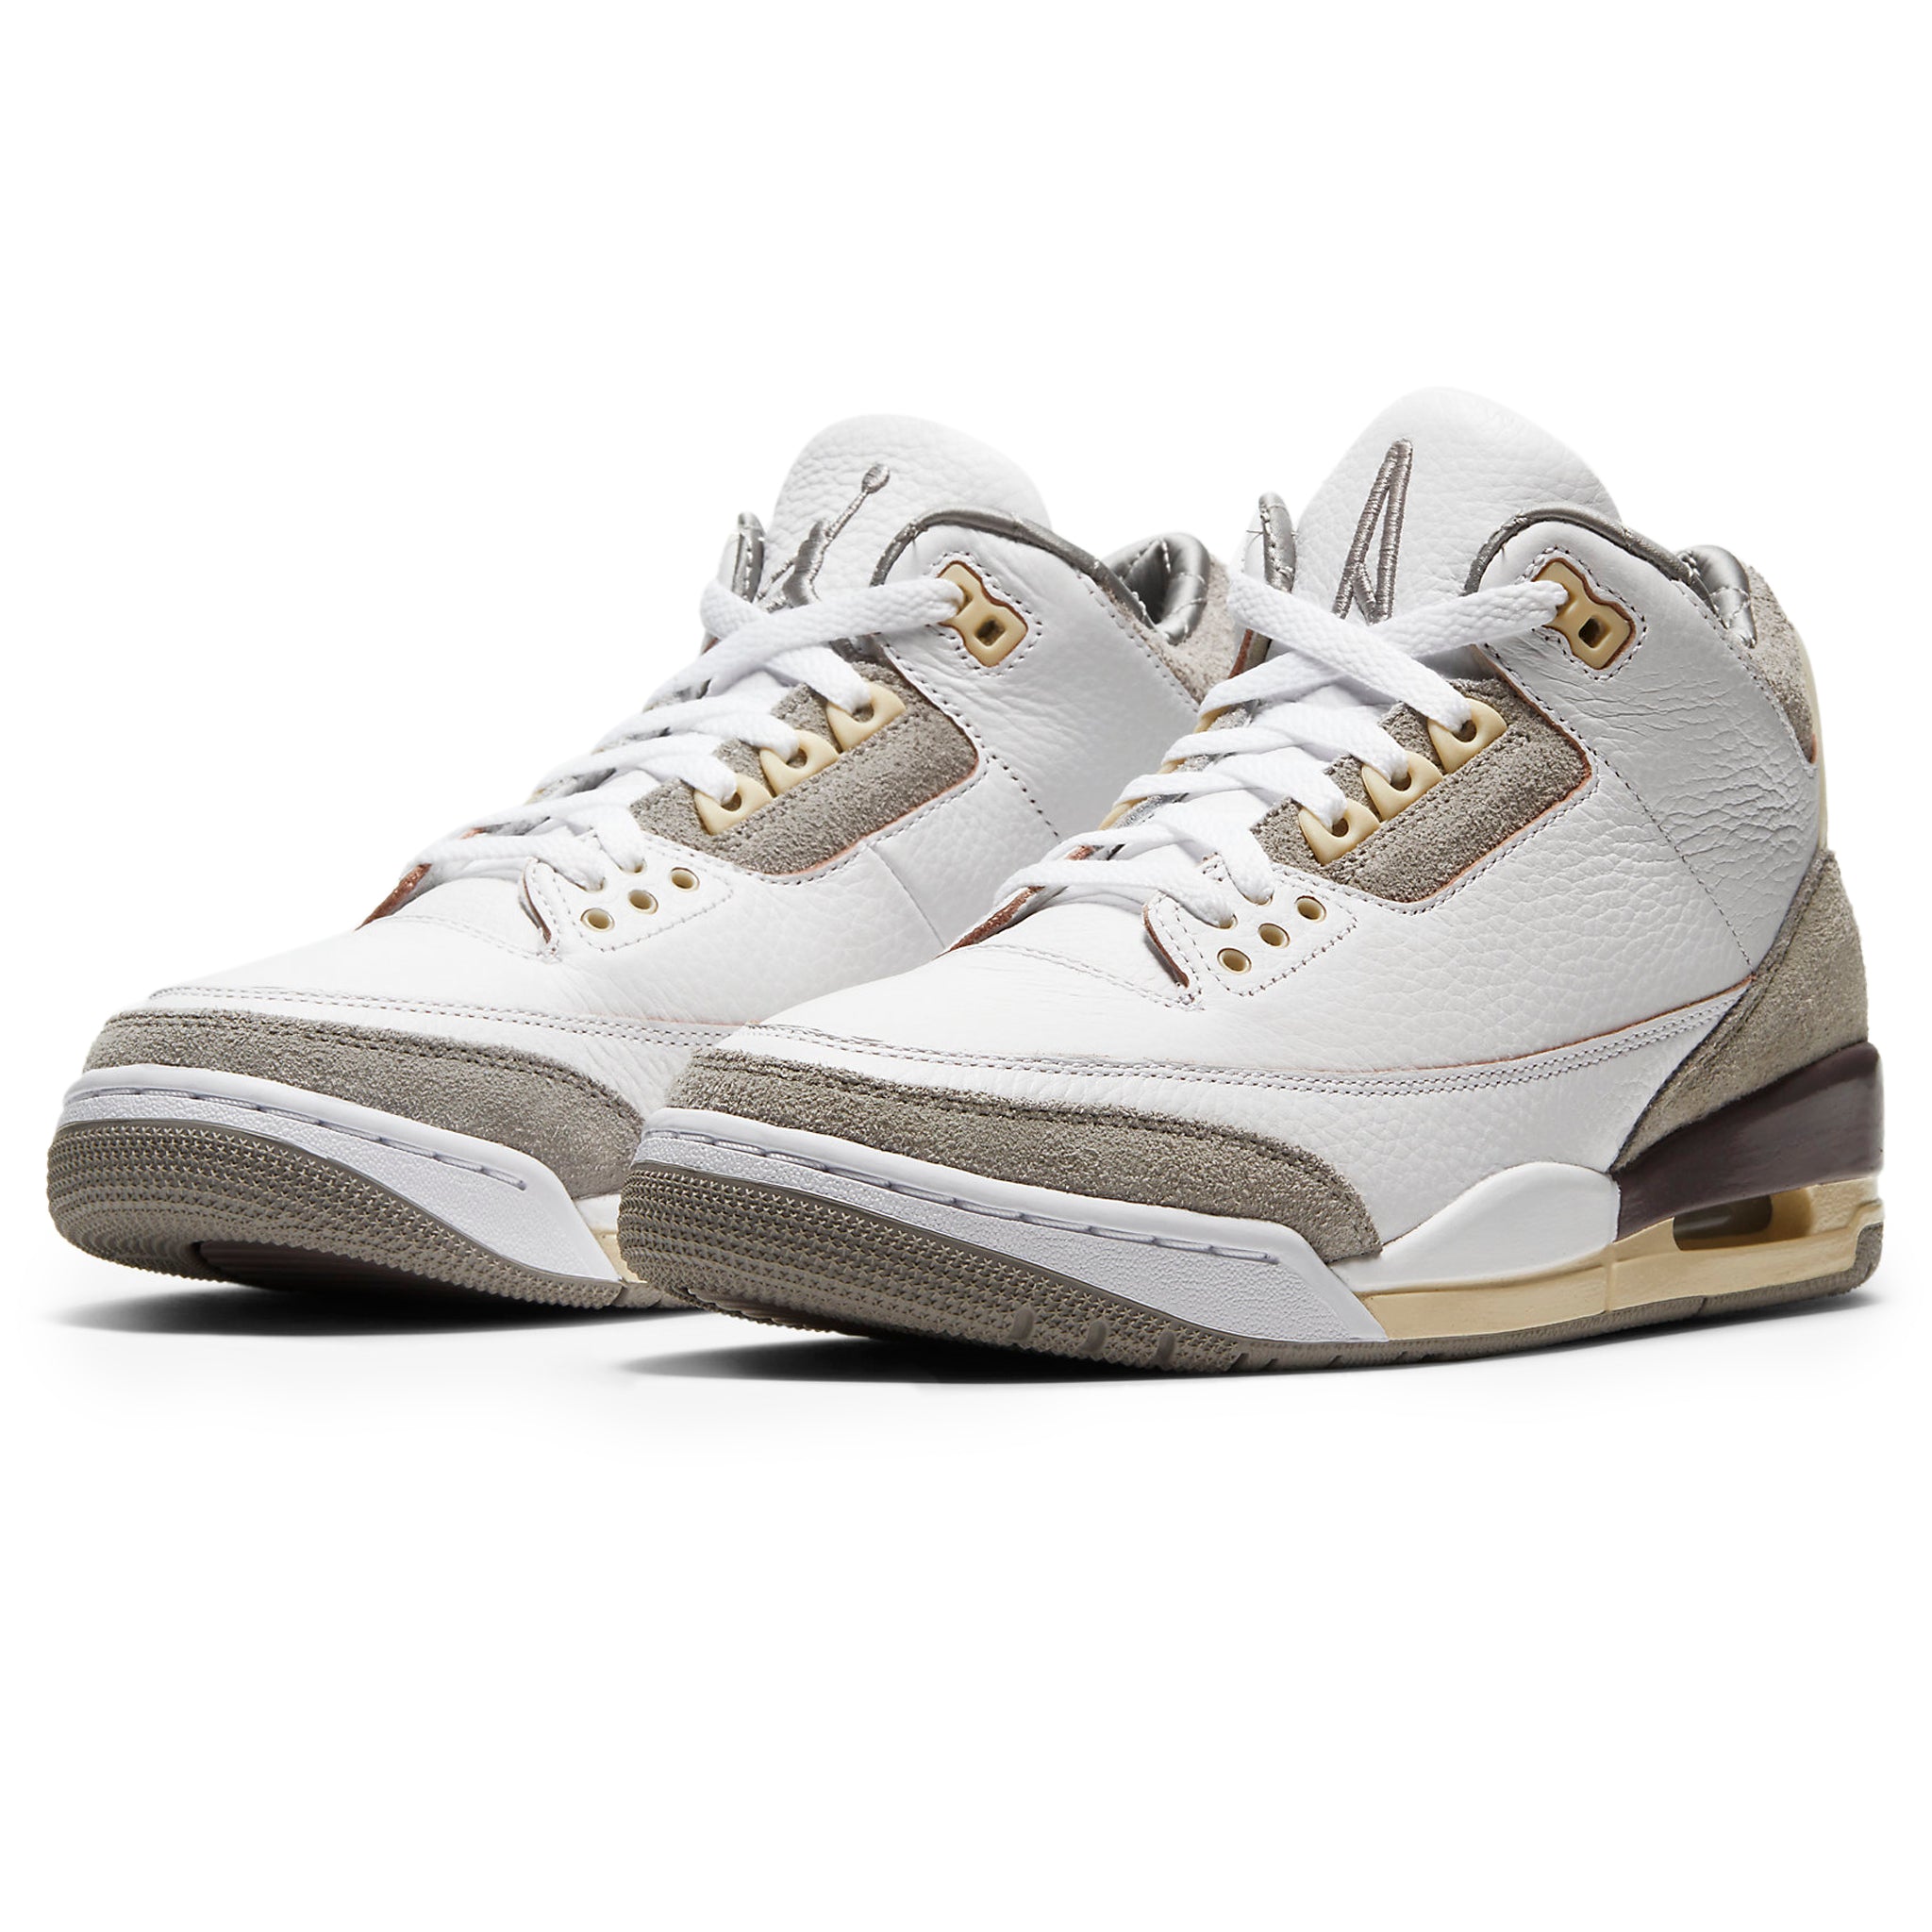 Front side view of Air Jordan 3 Retro A Ma Maniére (W) DH3434-110